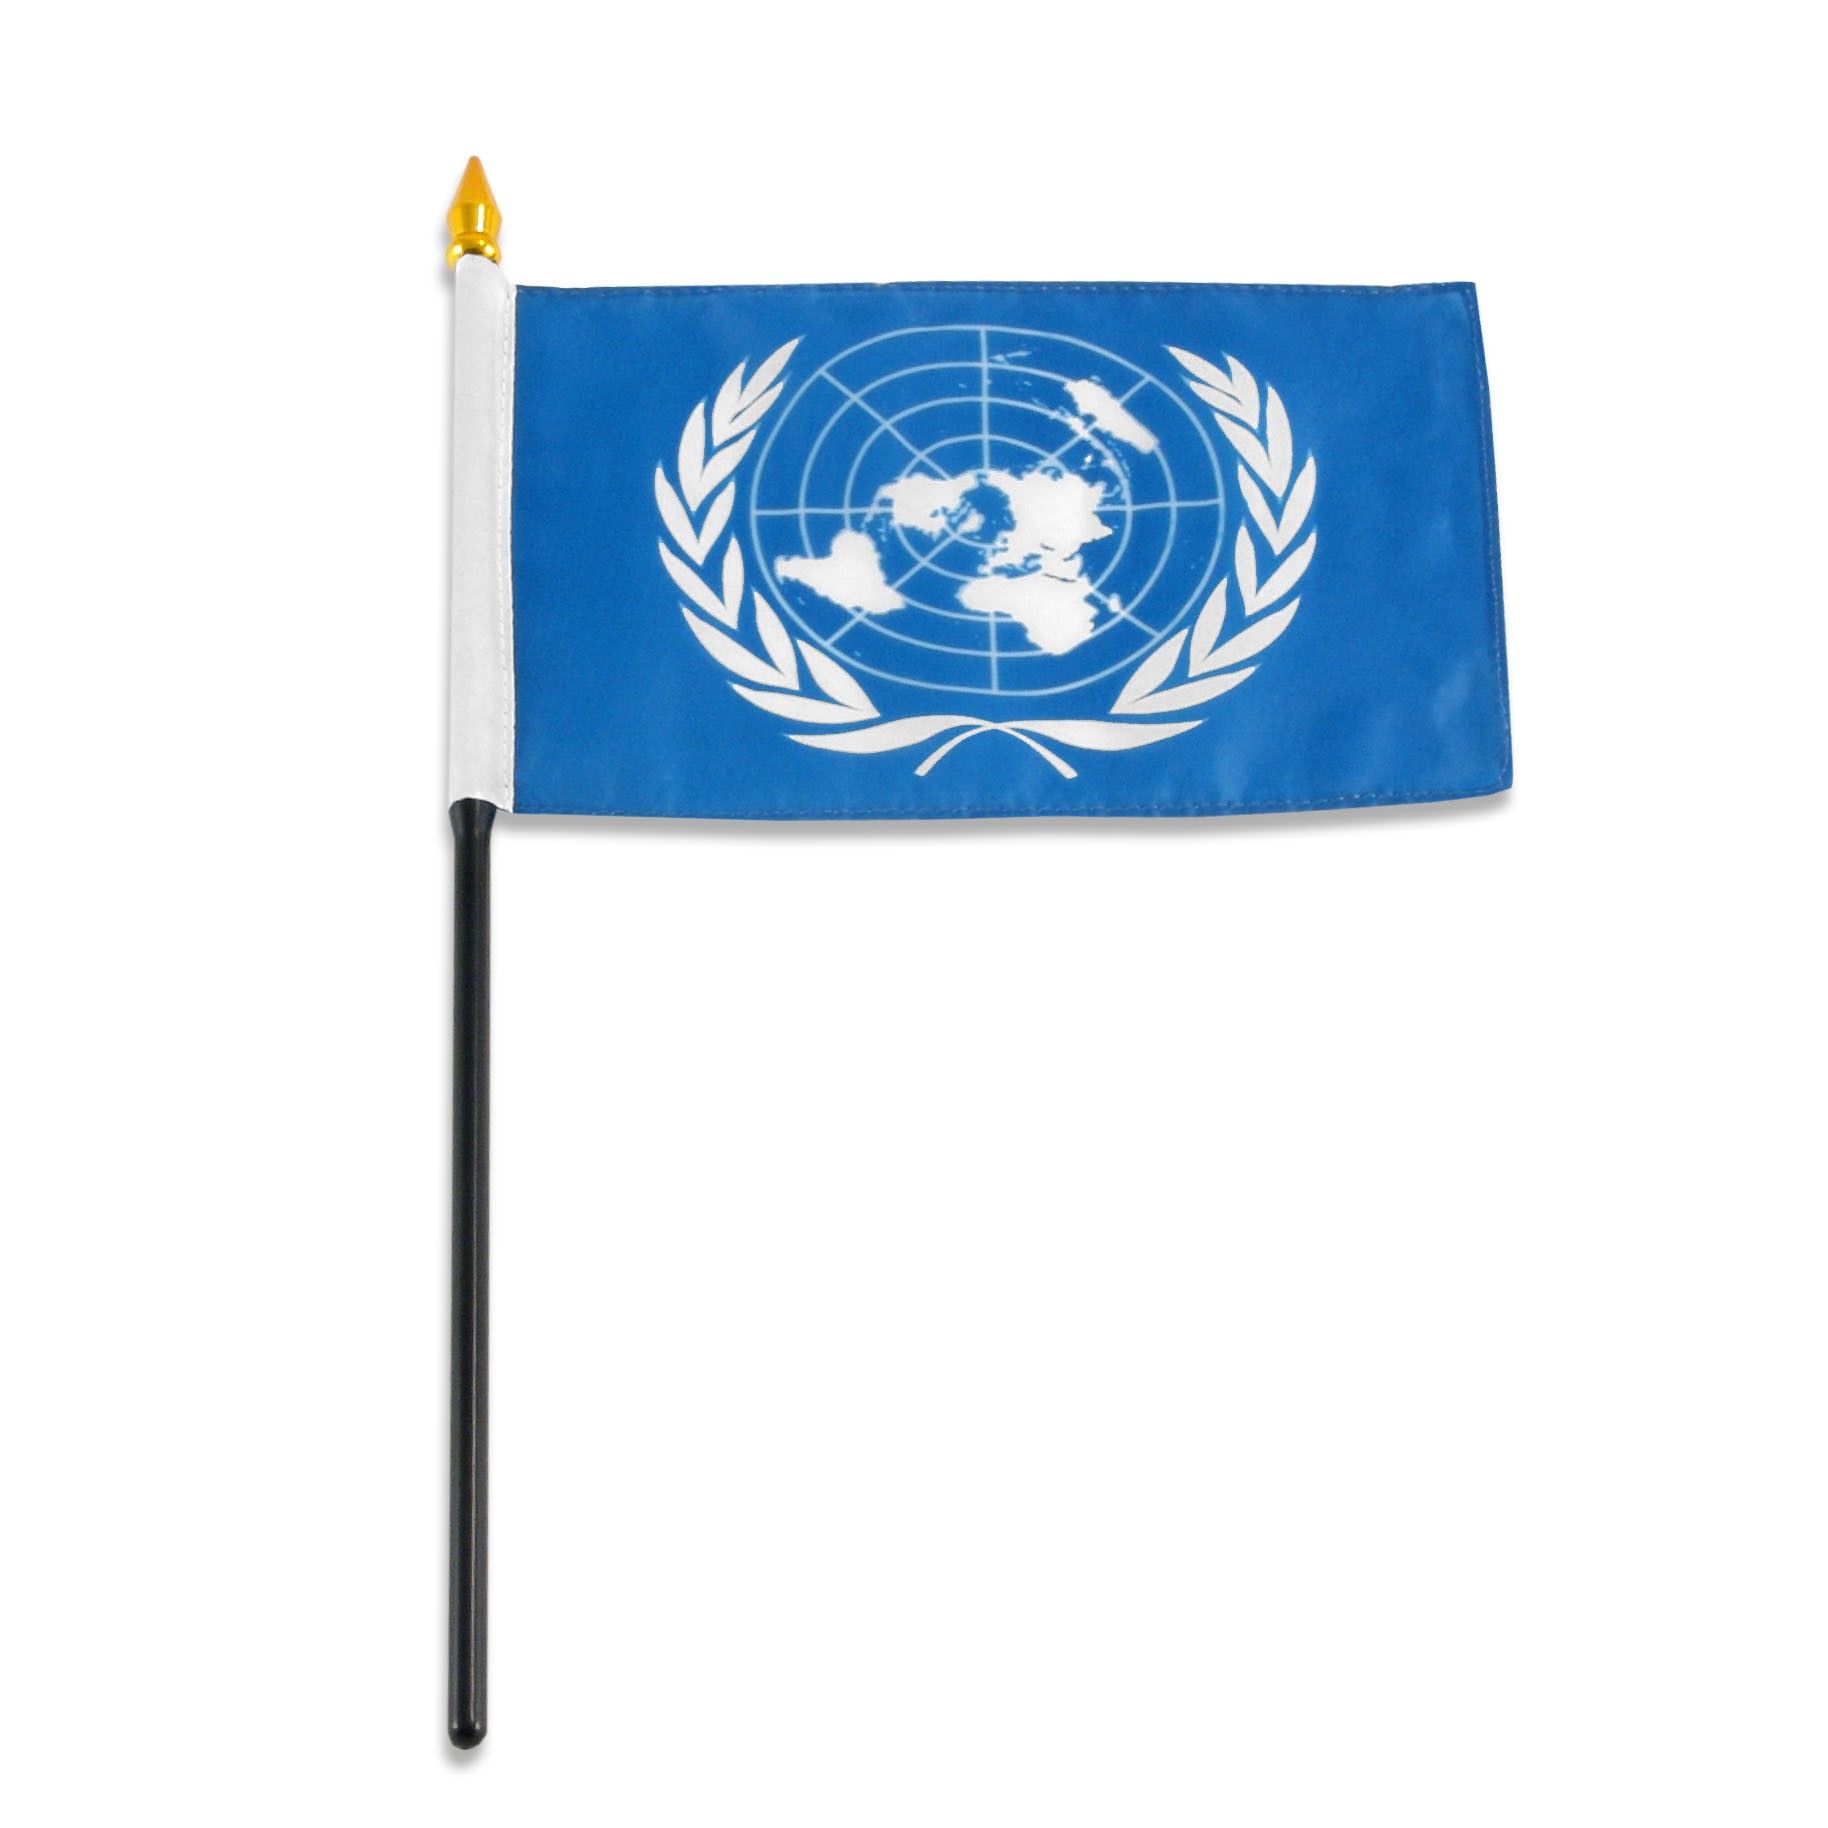 Flag Of The United Nations wallpaper, Misc, HQ Flag Of The United Nations pictureK Wallpaper 2019